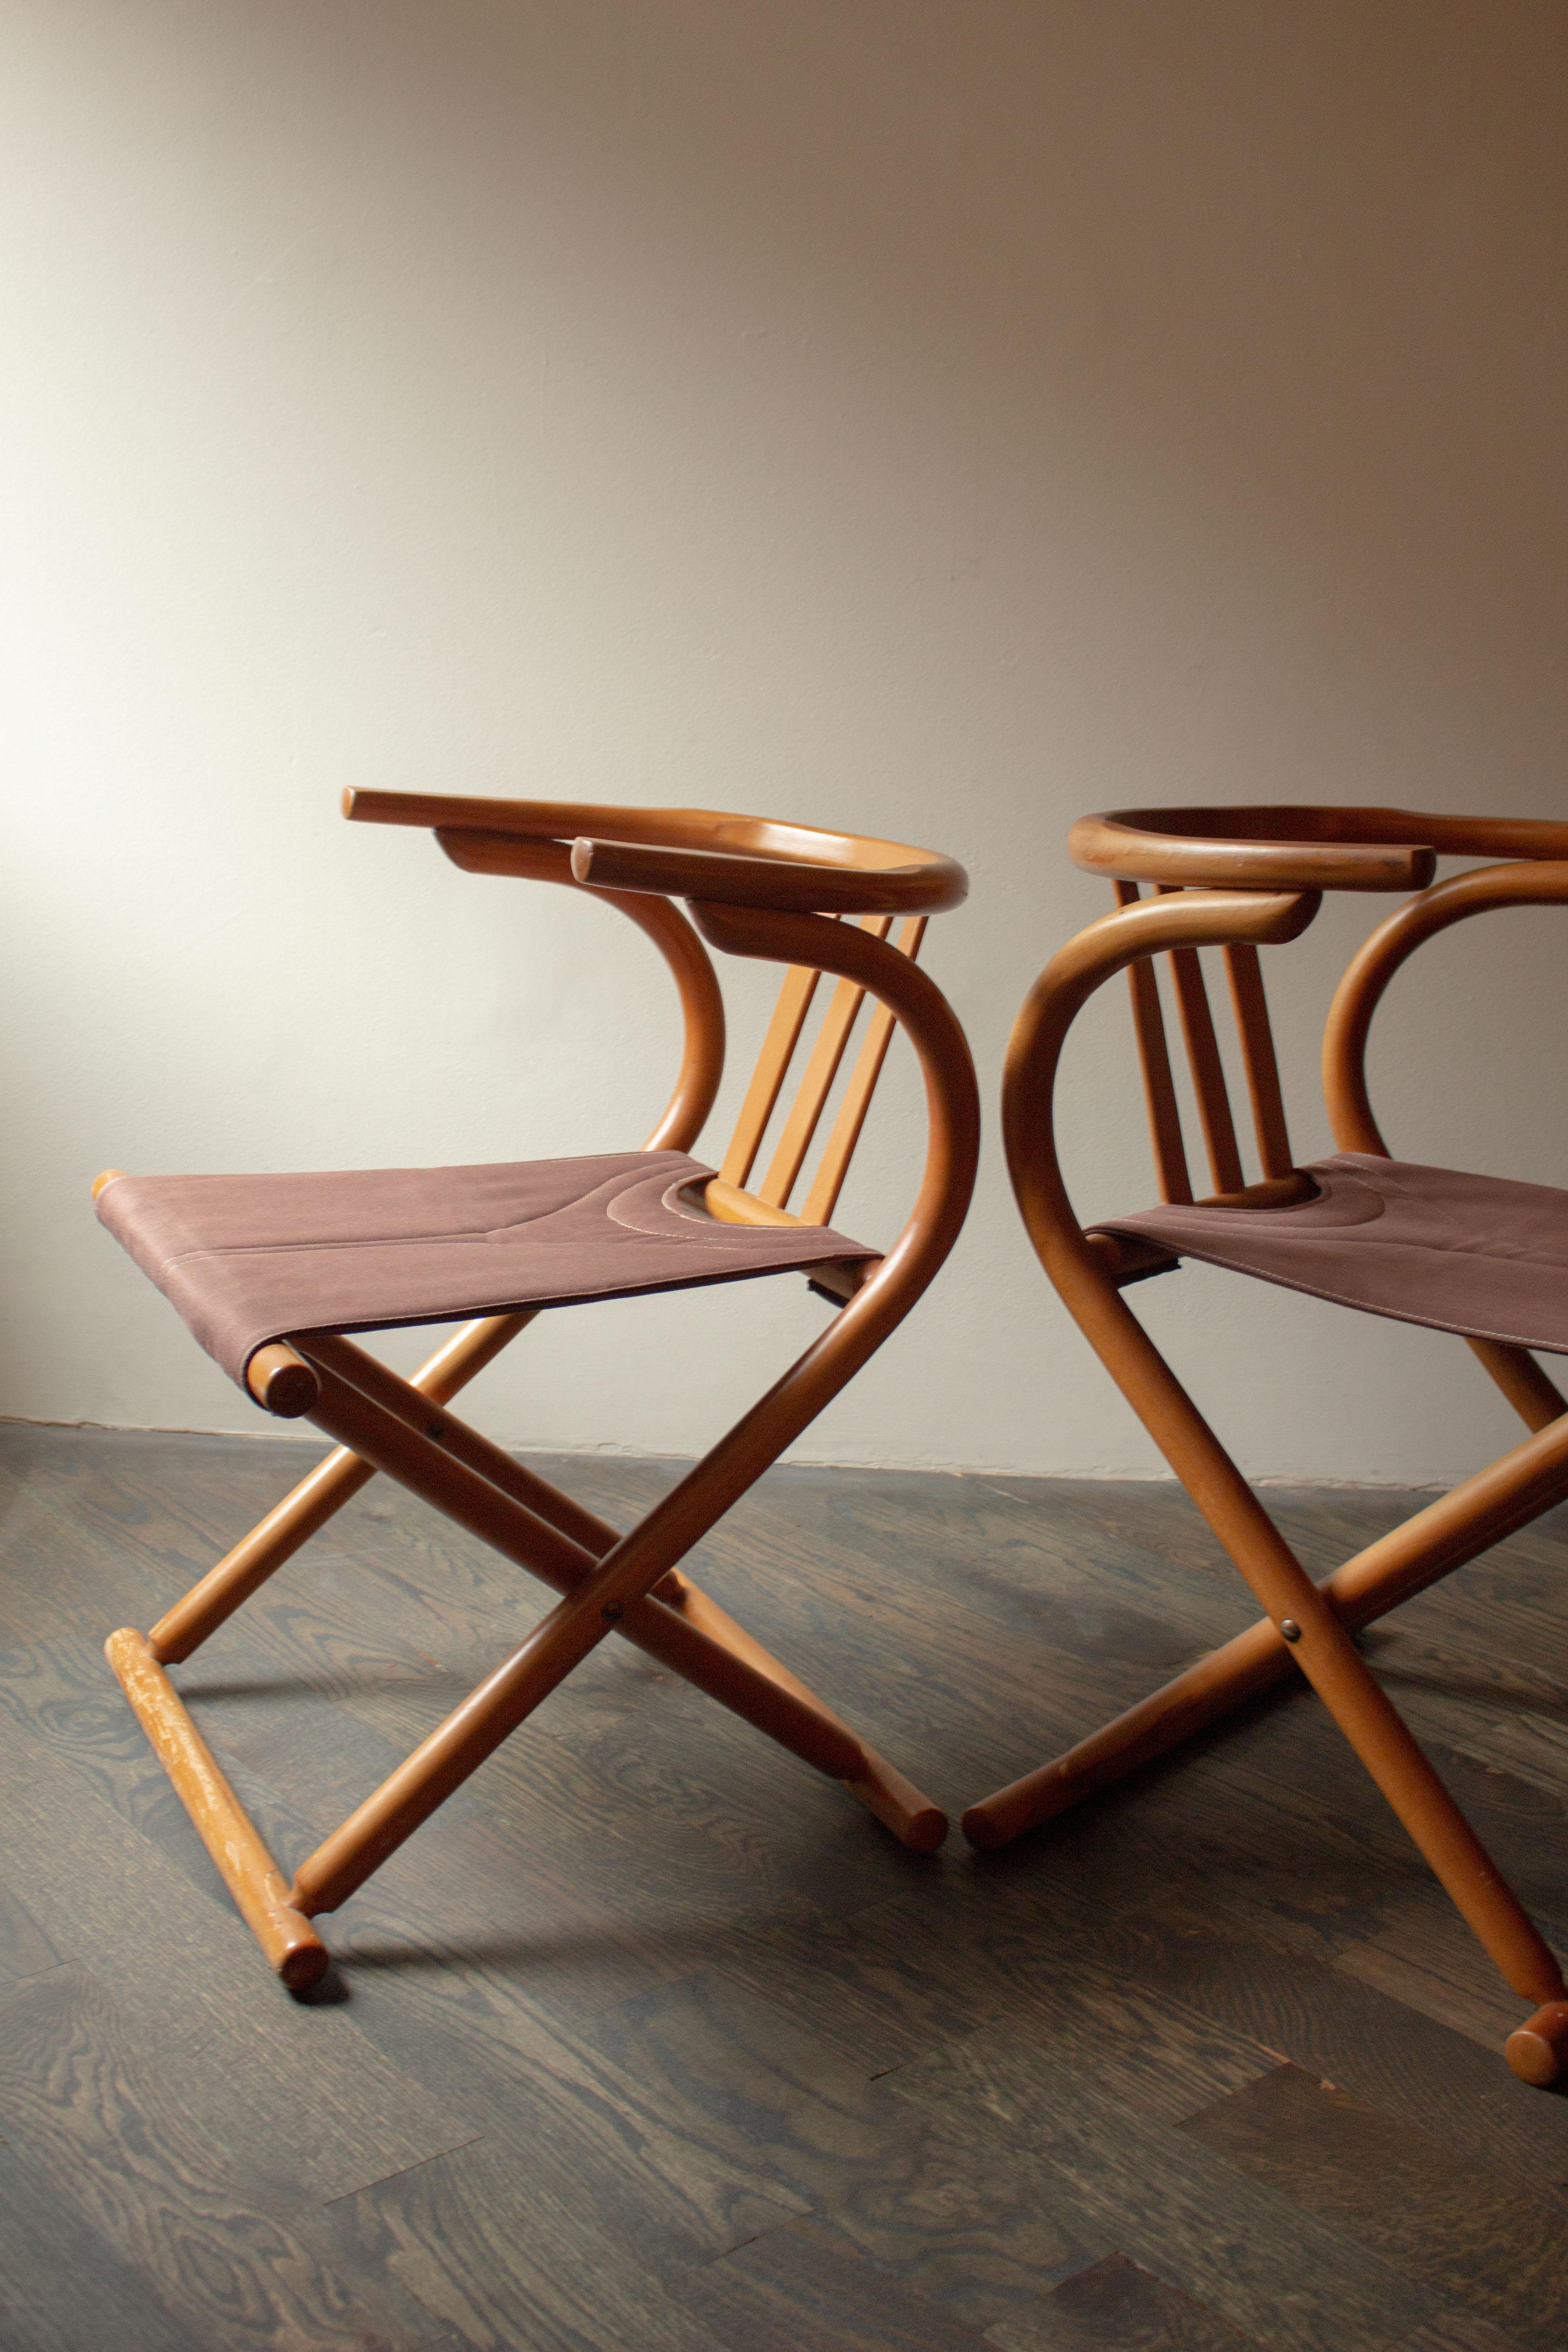 A unique pair of chairs with a heavy Thonet influence. From the bentwood, the lines and curves, the sleekness, the fluidity. Classic yet so unusual. Canvas and wood are in great condition.